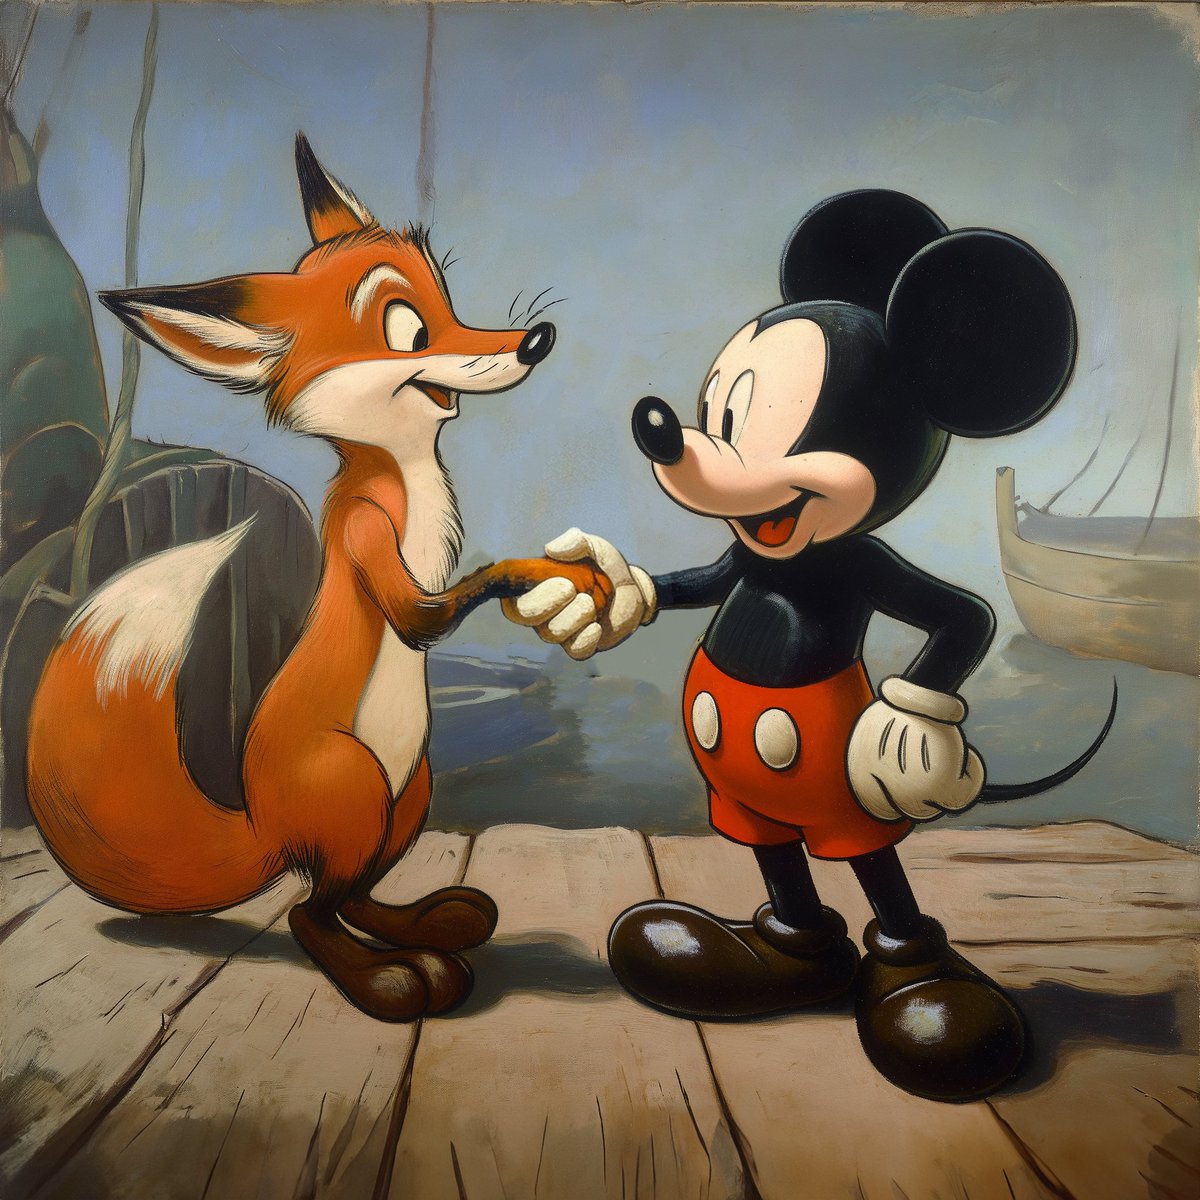 Normally when something becomes public domain, it doesn’t make waves, but this one, or mouse, is something very special. Welcome to the world of public domain, Mickey! We can’t wait to see where you go from here. #followthefox #mickeymouse  #creativeadvertising #brandstorytellers